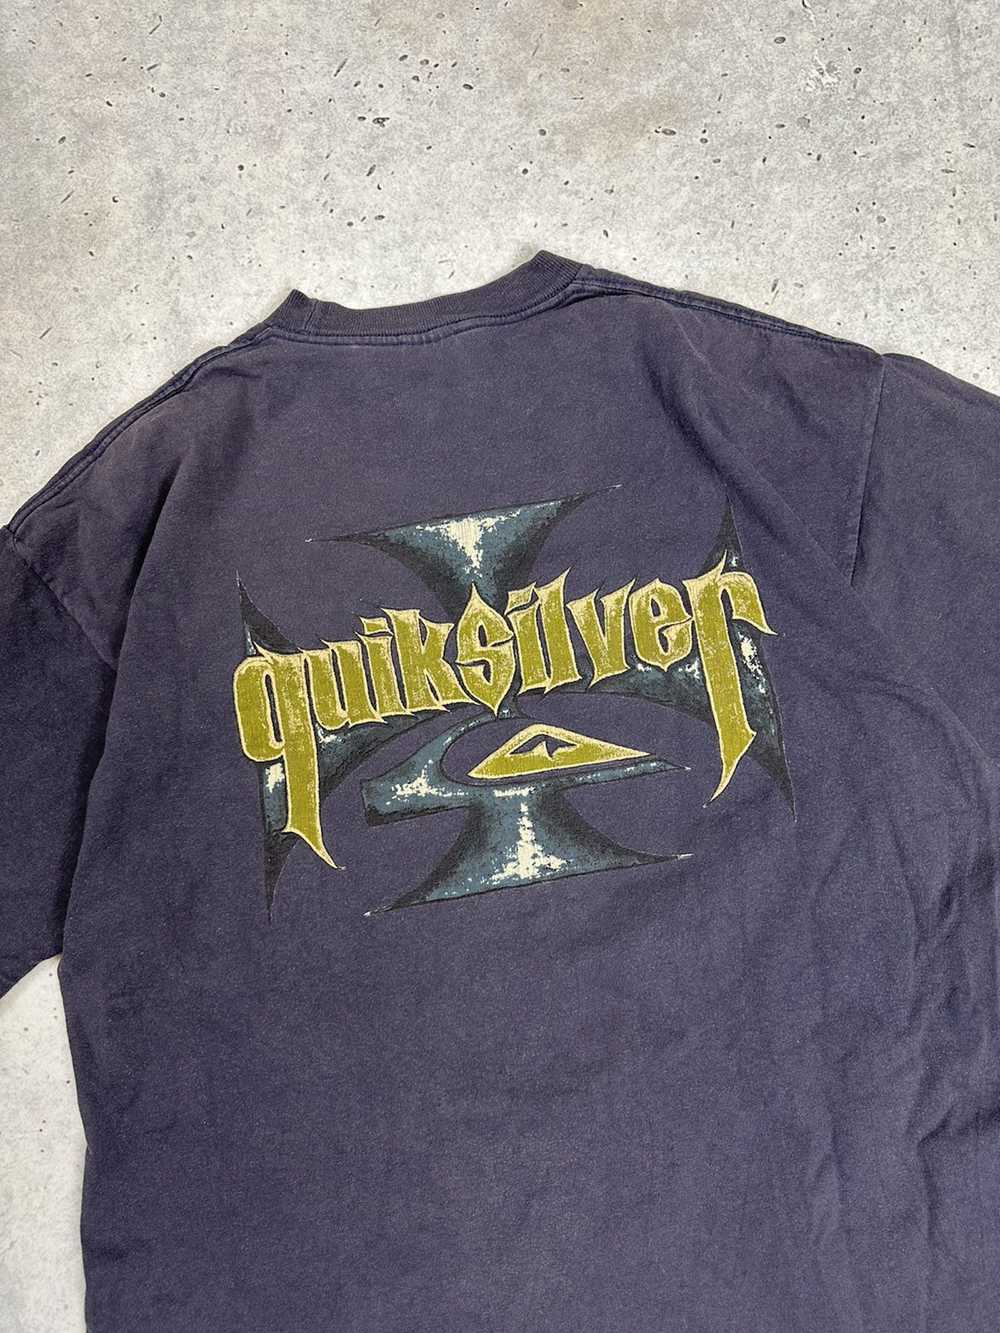 Made In Usa × Quiksilver × Vintage Vintage 80s Qu… - image 2